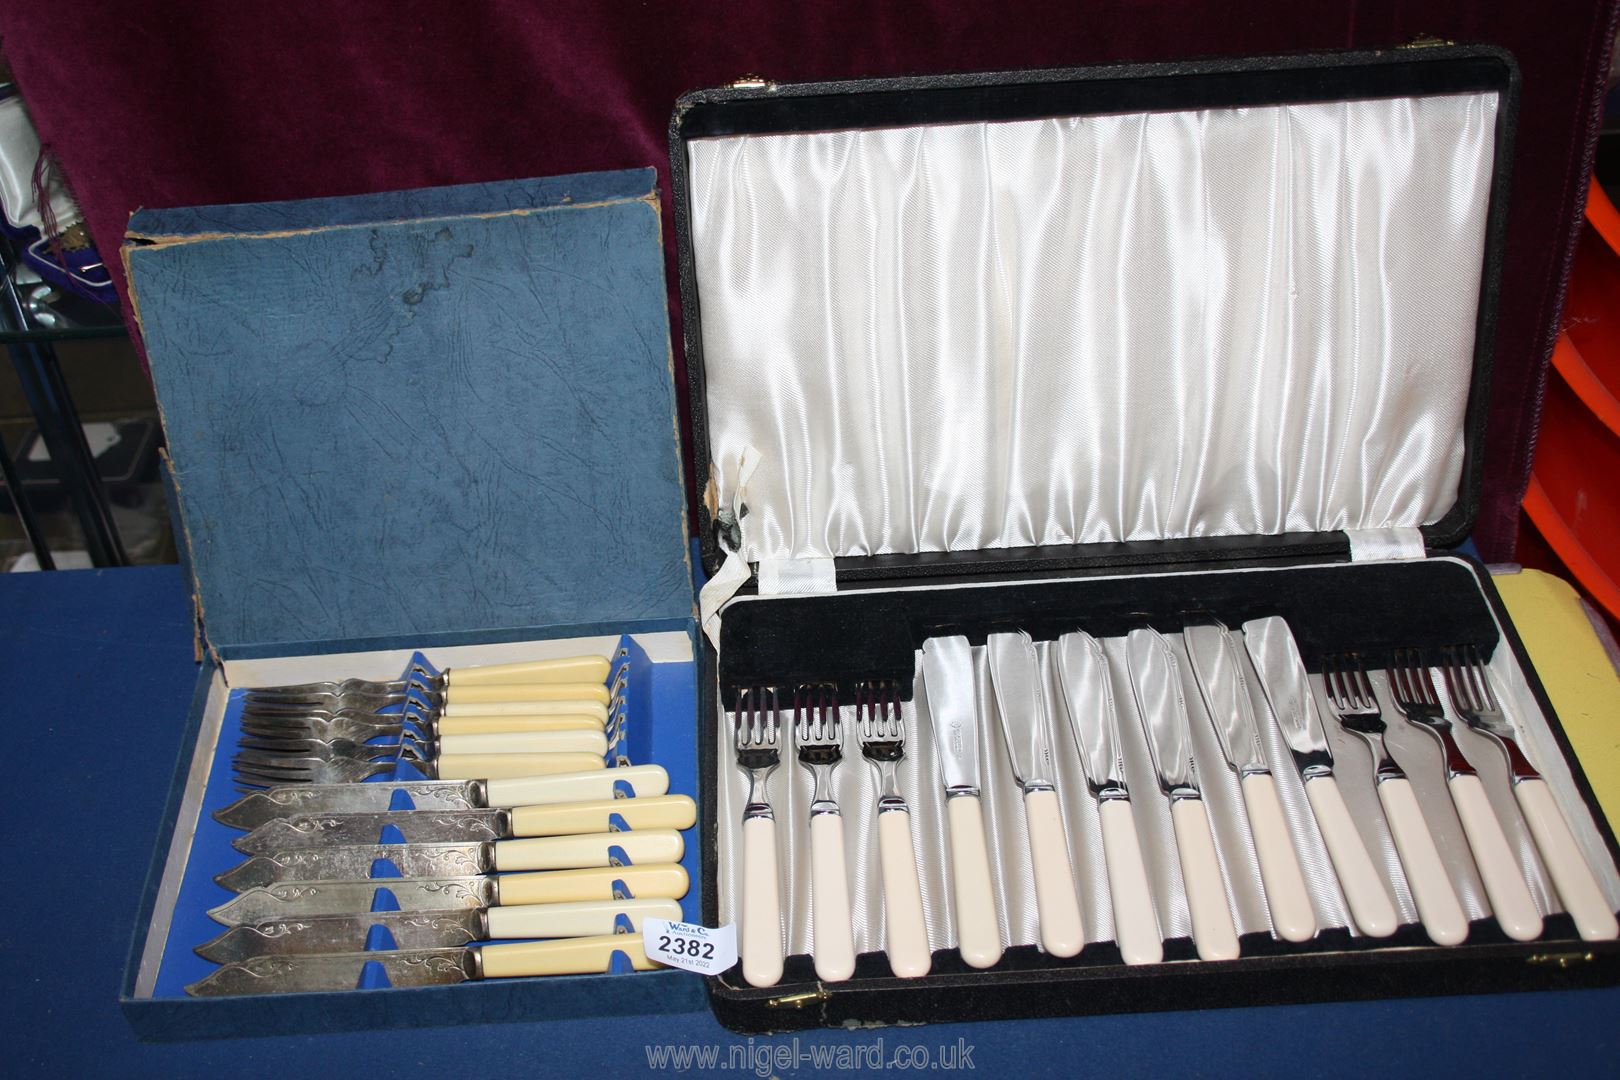 A boxed set of white handled Fish knives and forks plus another bone handled set.